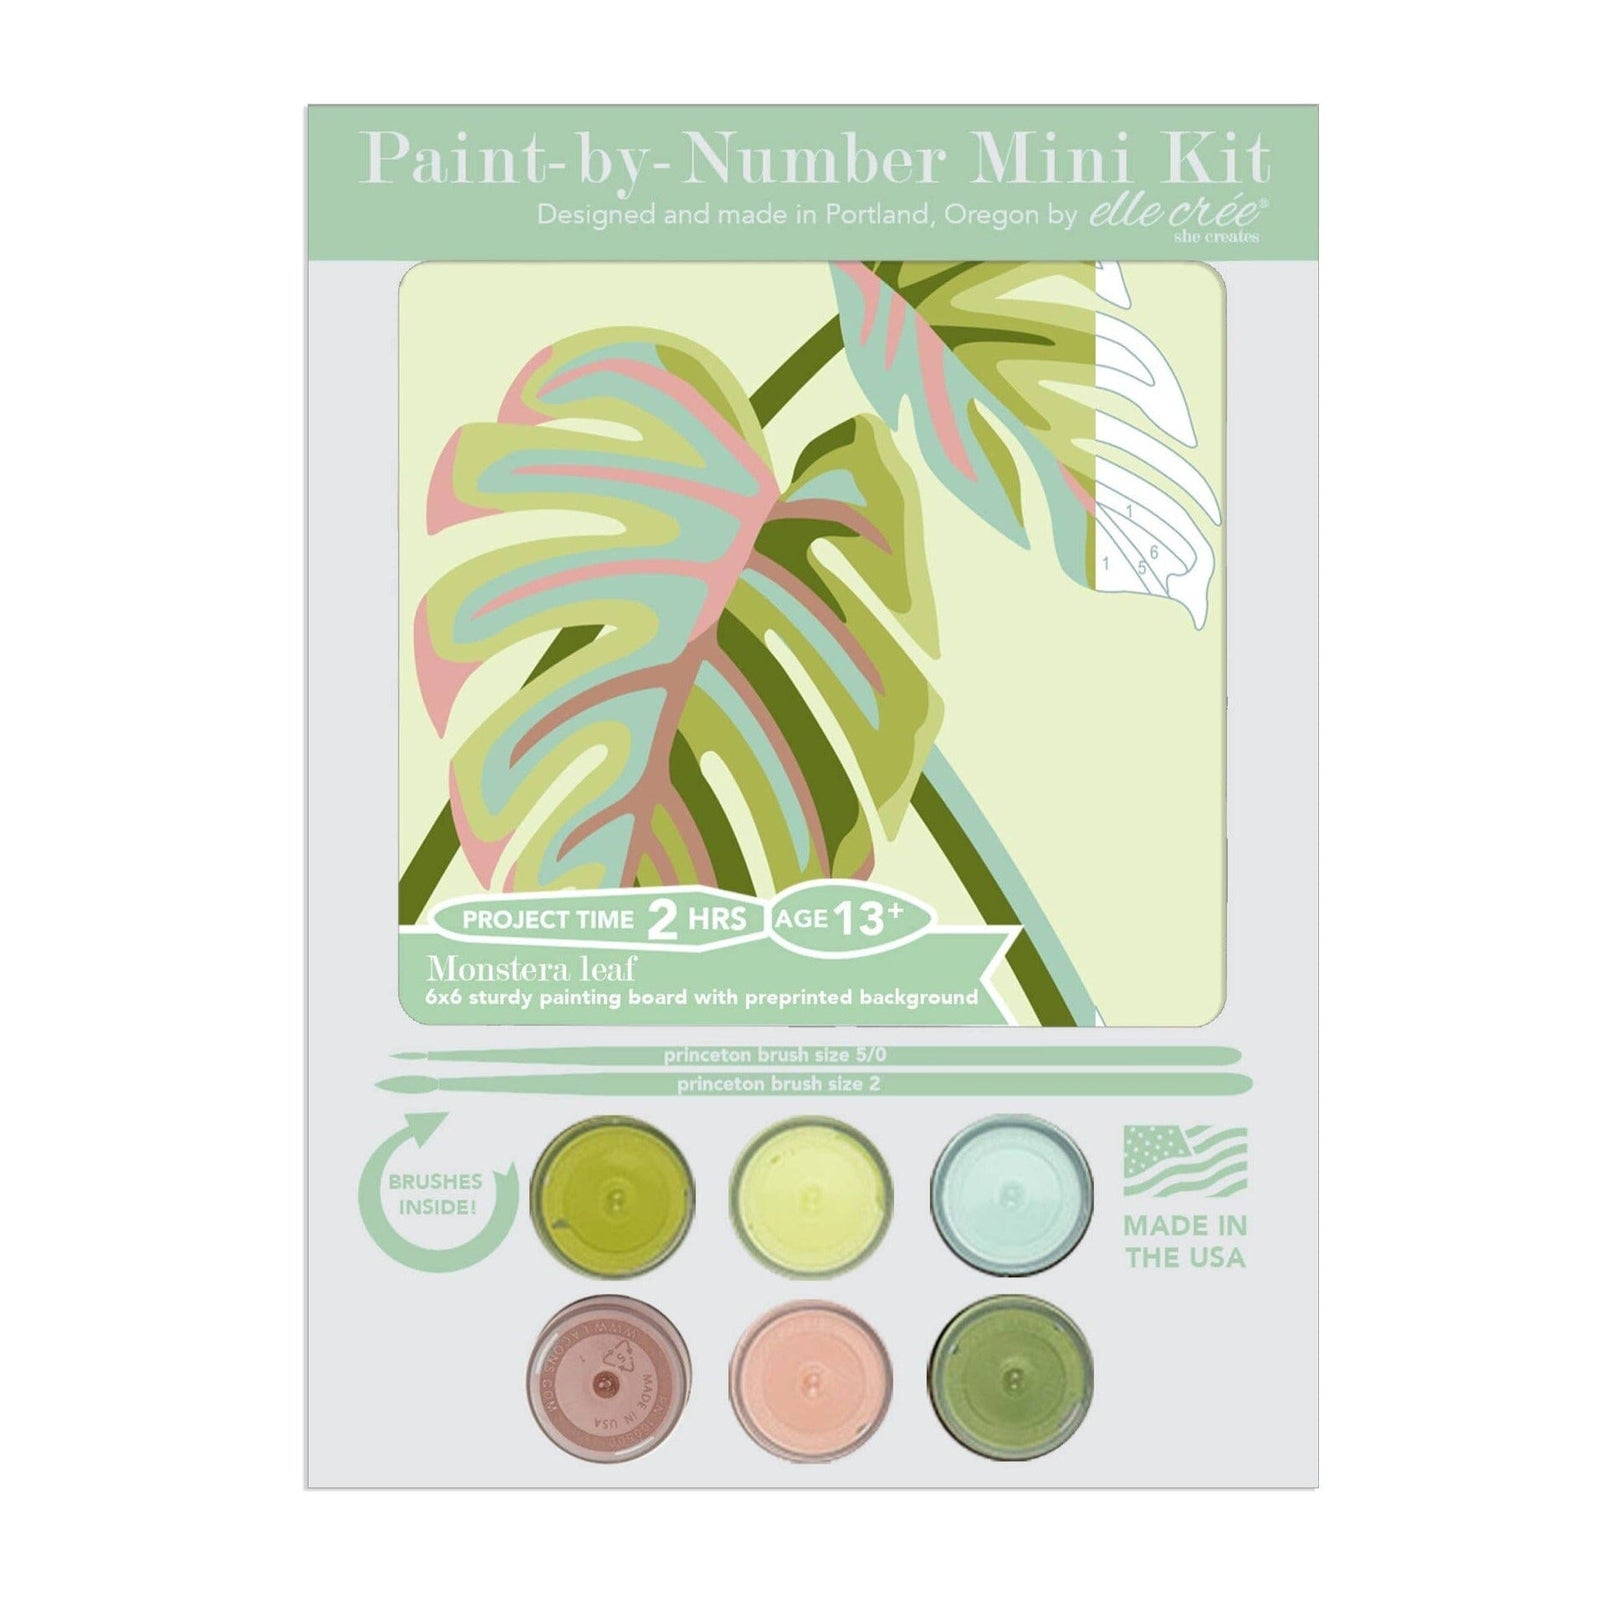 Paint-by-Number Kit - Fox with Chicory - Gift & Gather